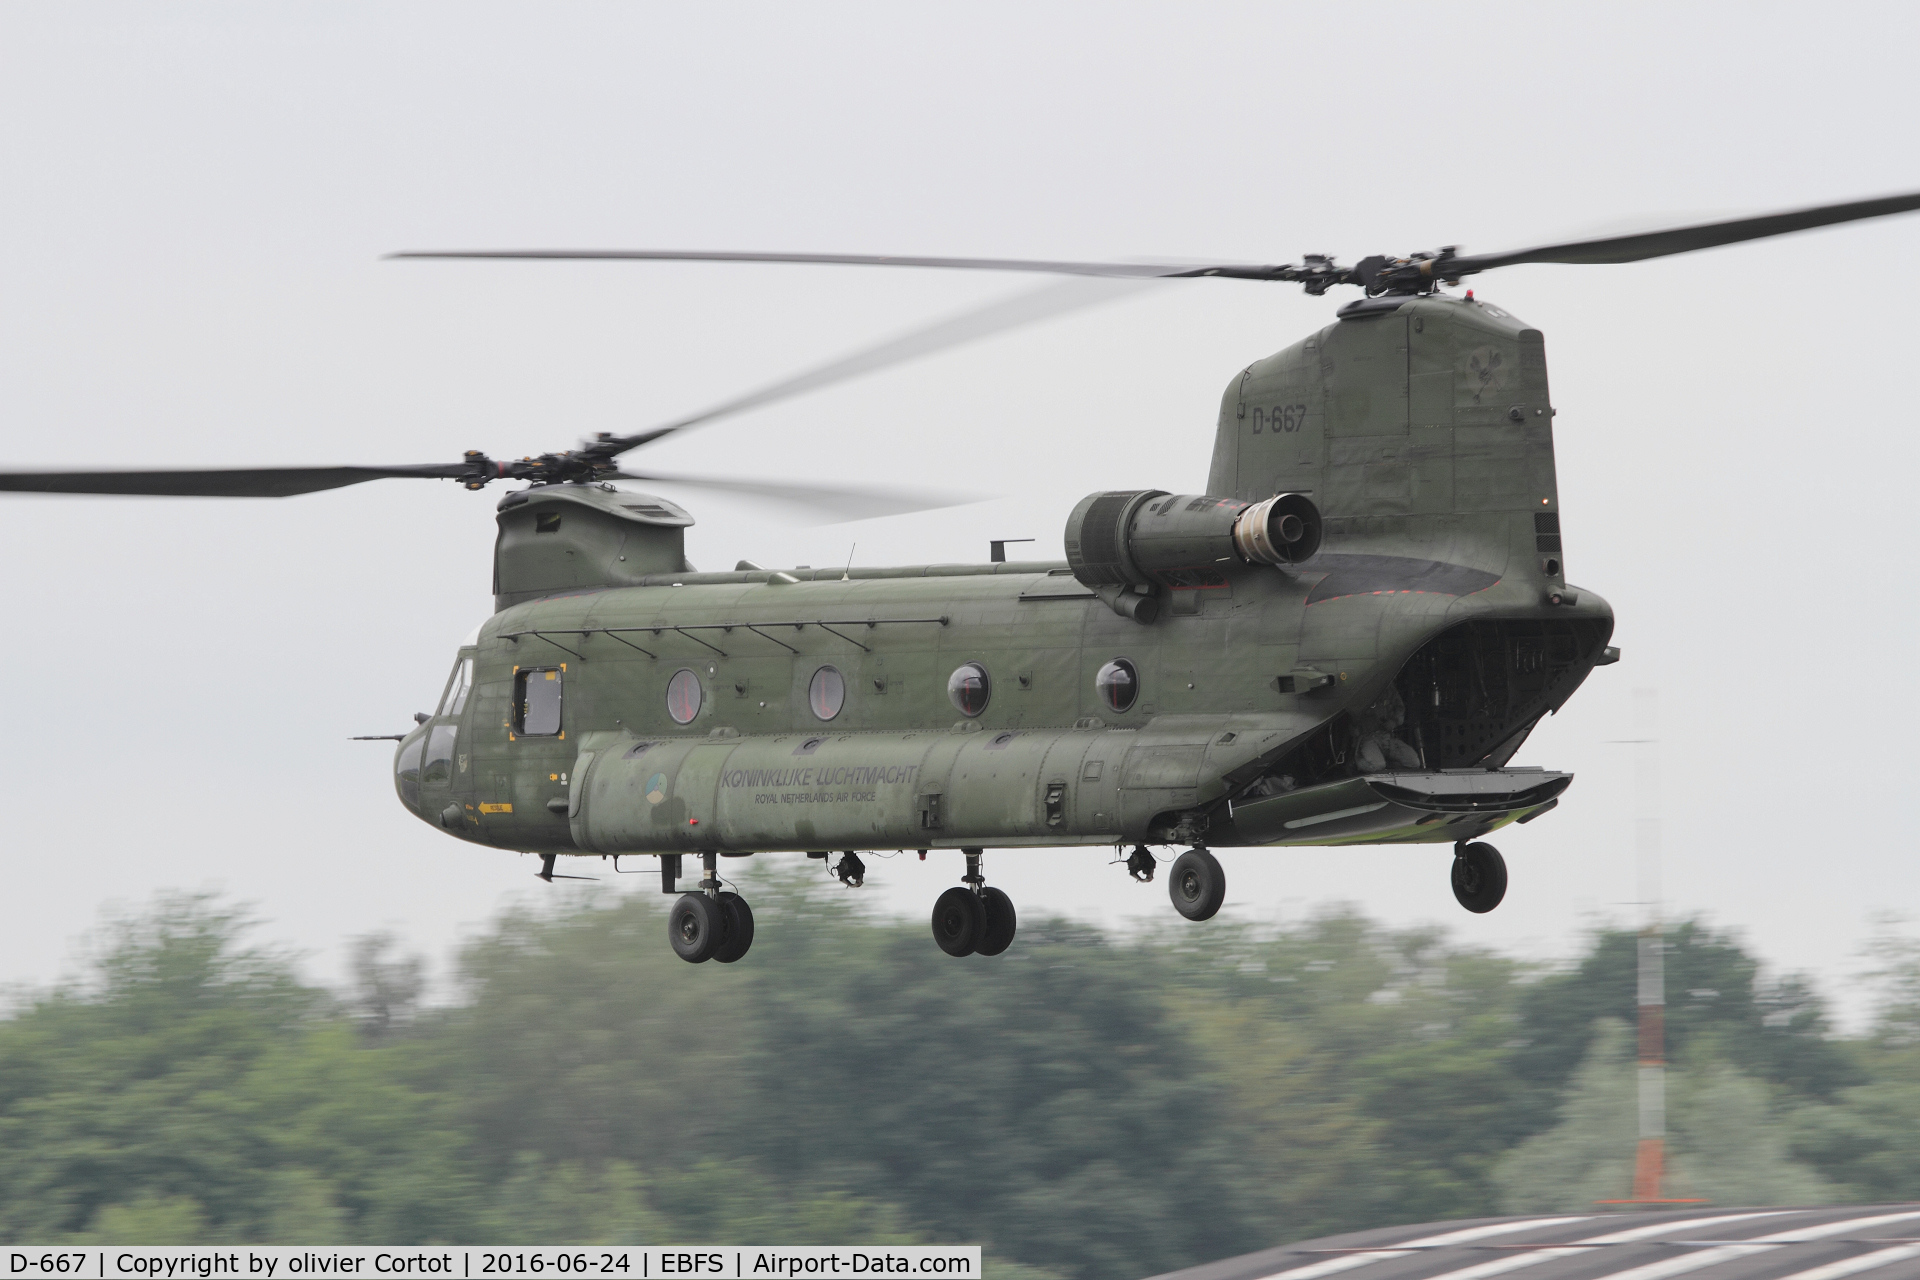 D-667, Boeing CH-47D Chinook C/N M.3667/NL-007, about to land at Florennes